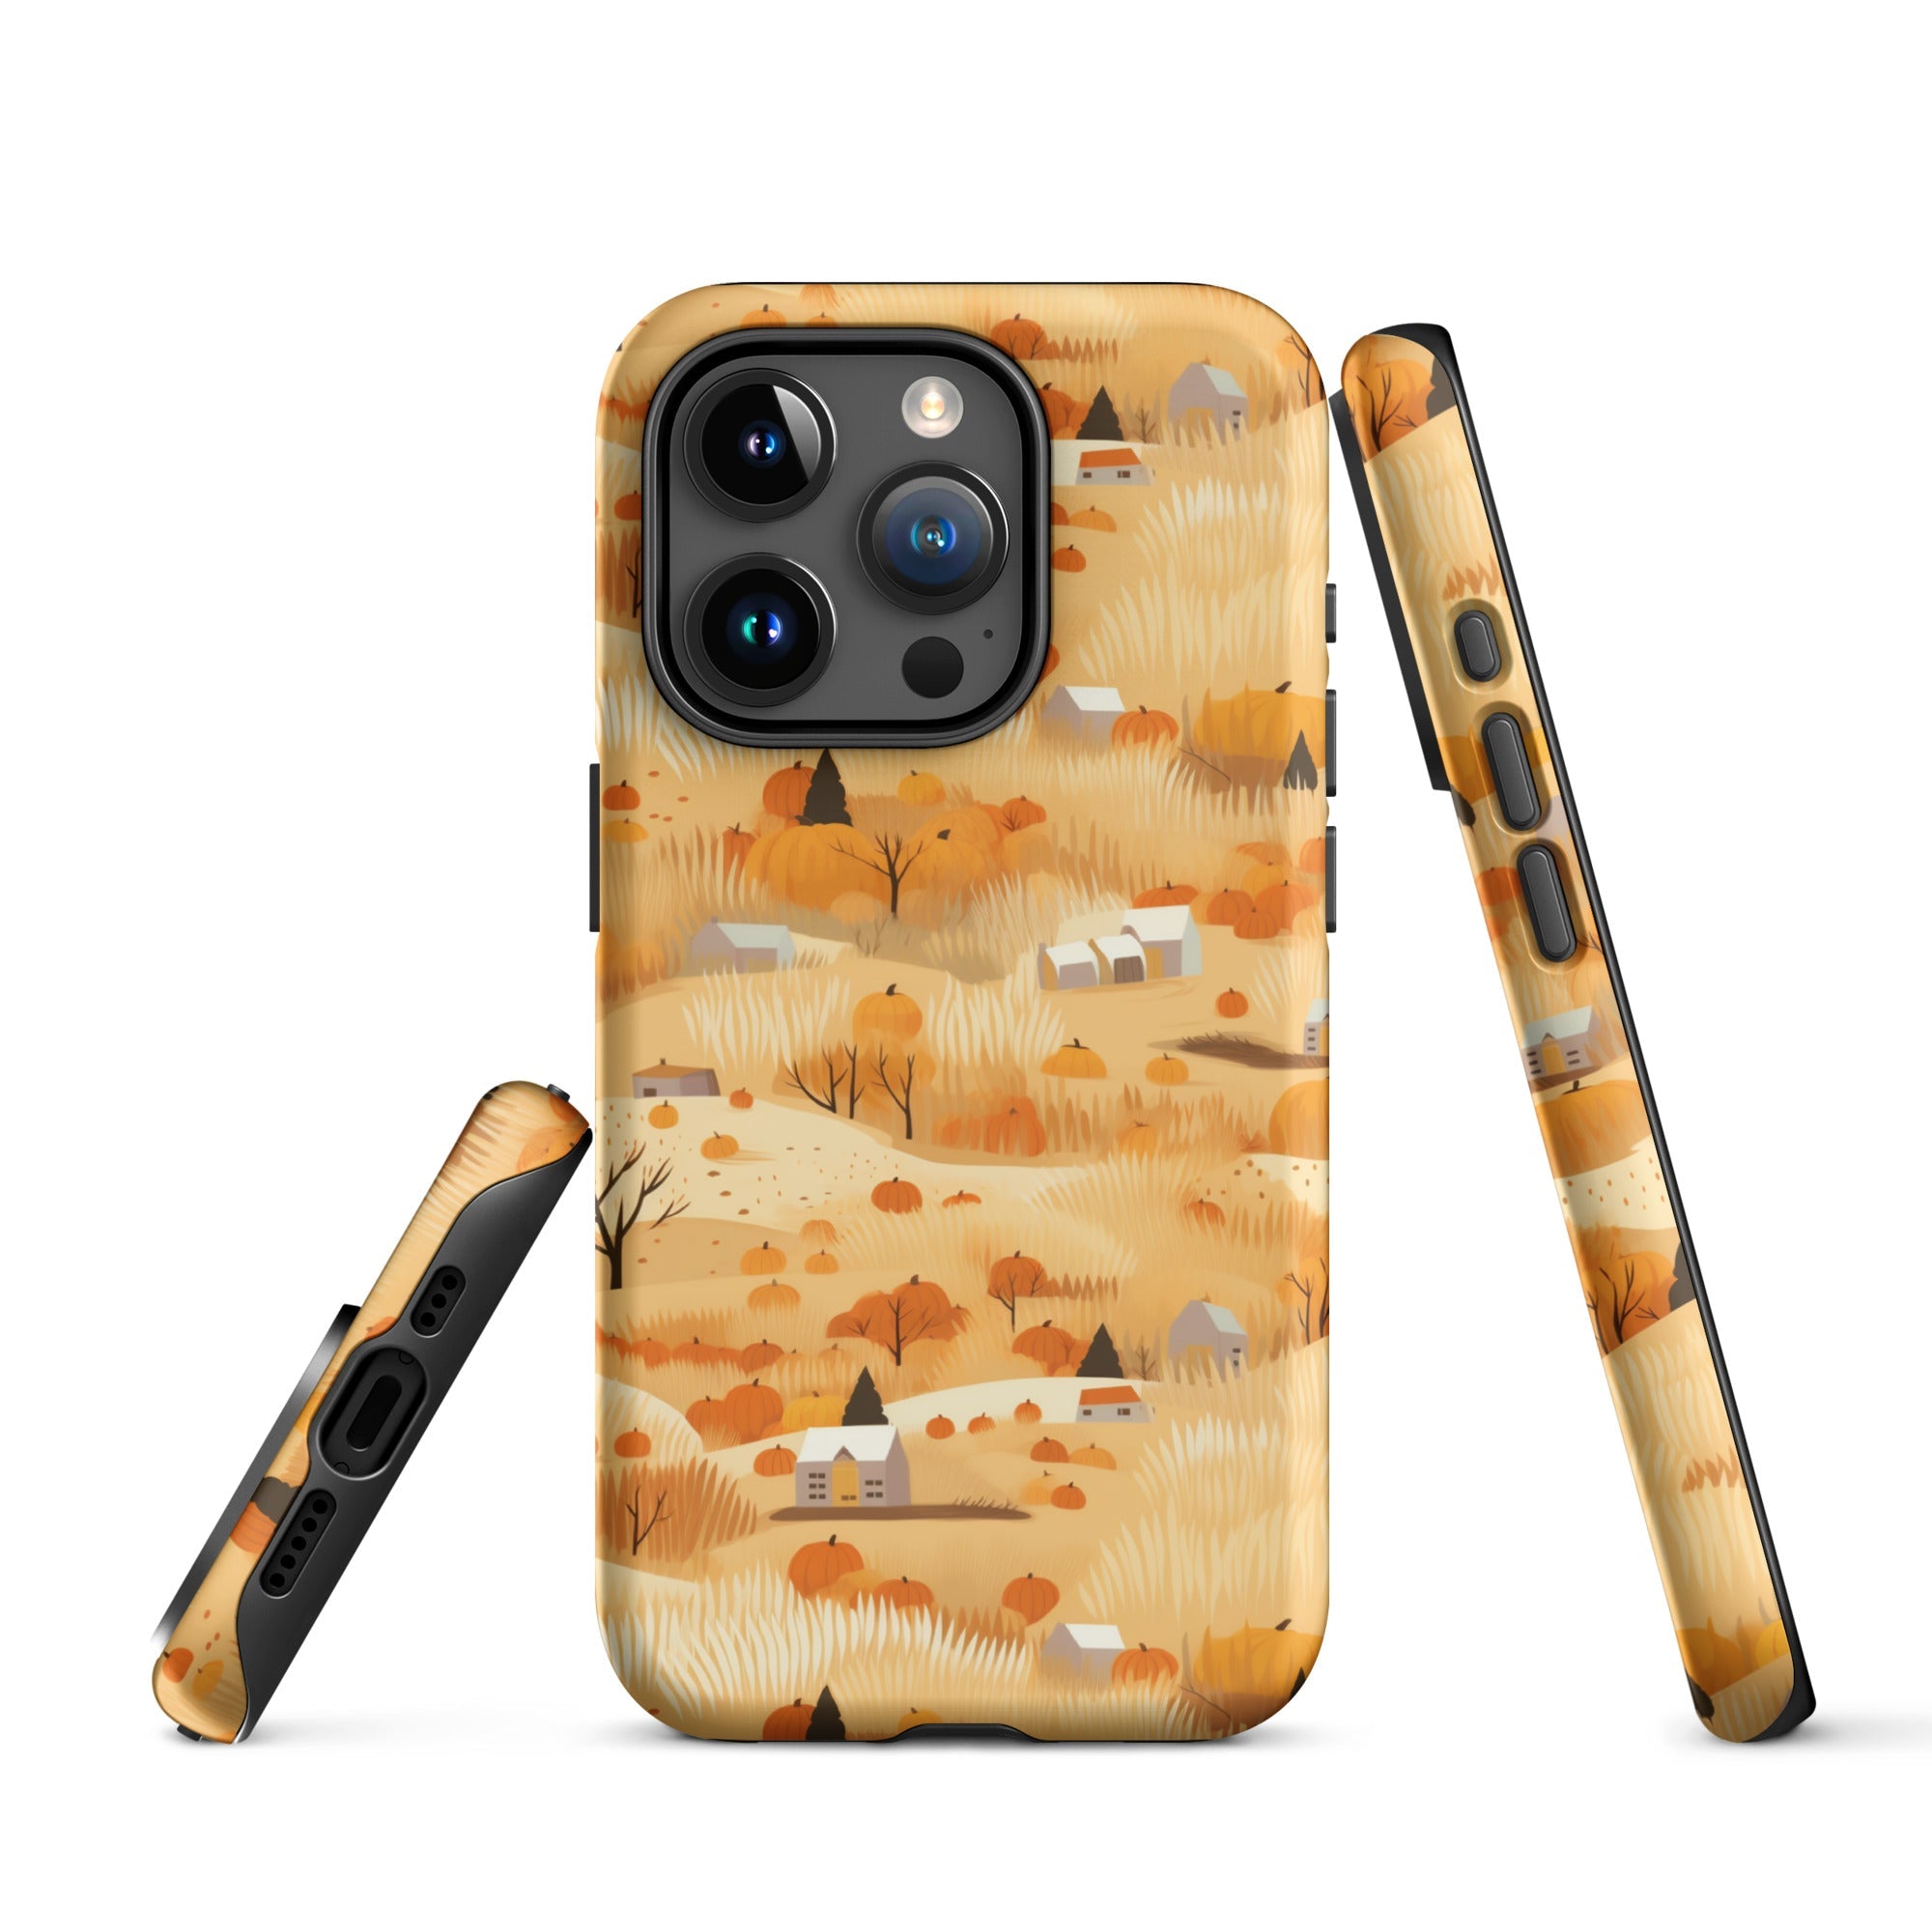 Harvest Homestead - Whimsical Autumn Villages - iPhone Case - Pattern Symphony